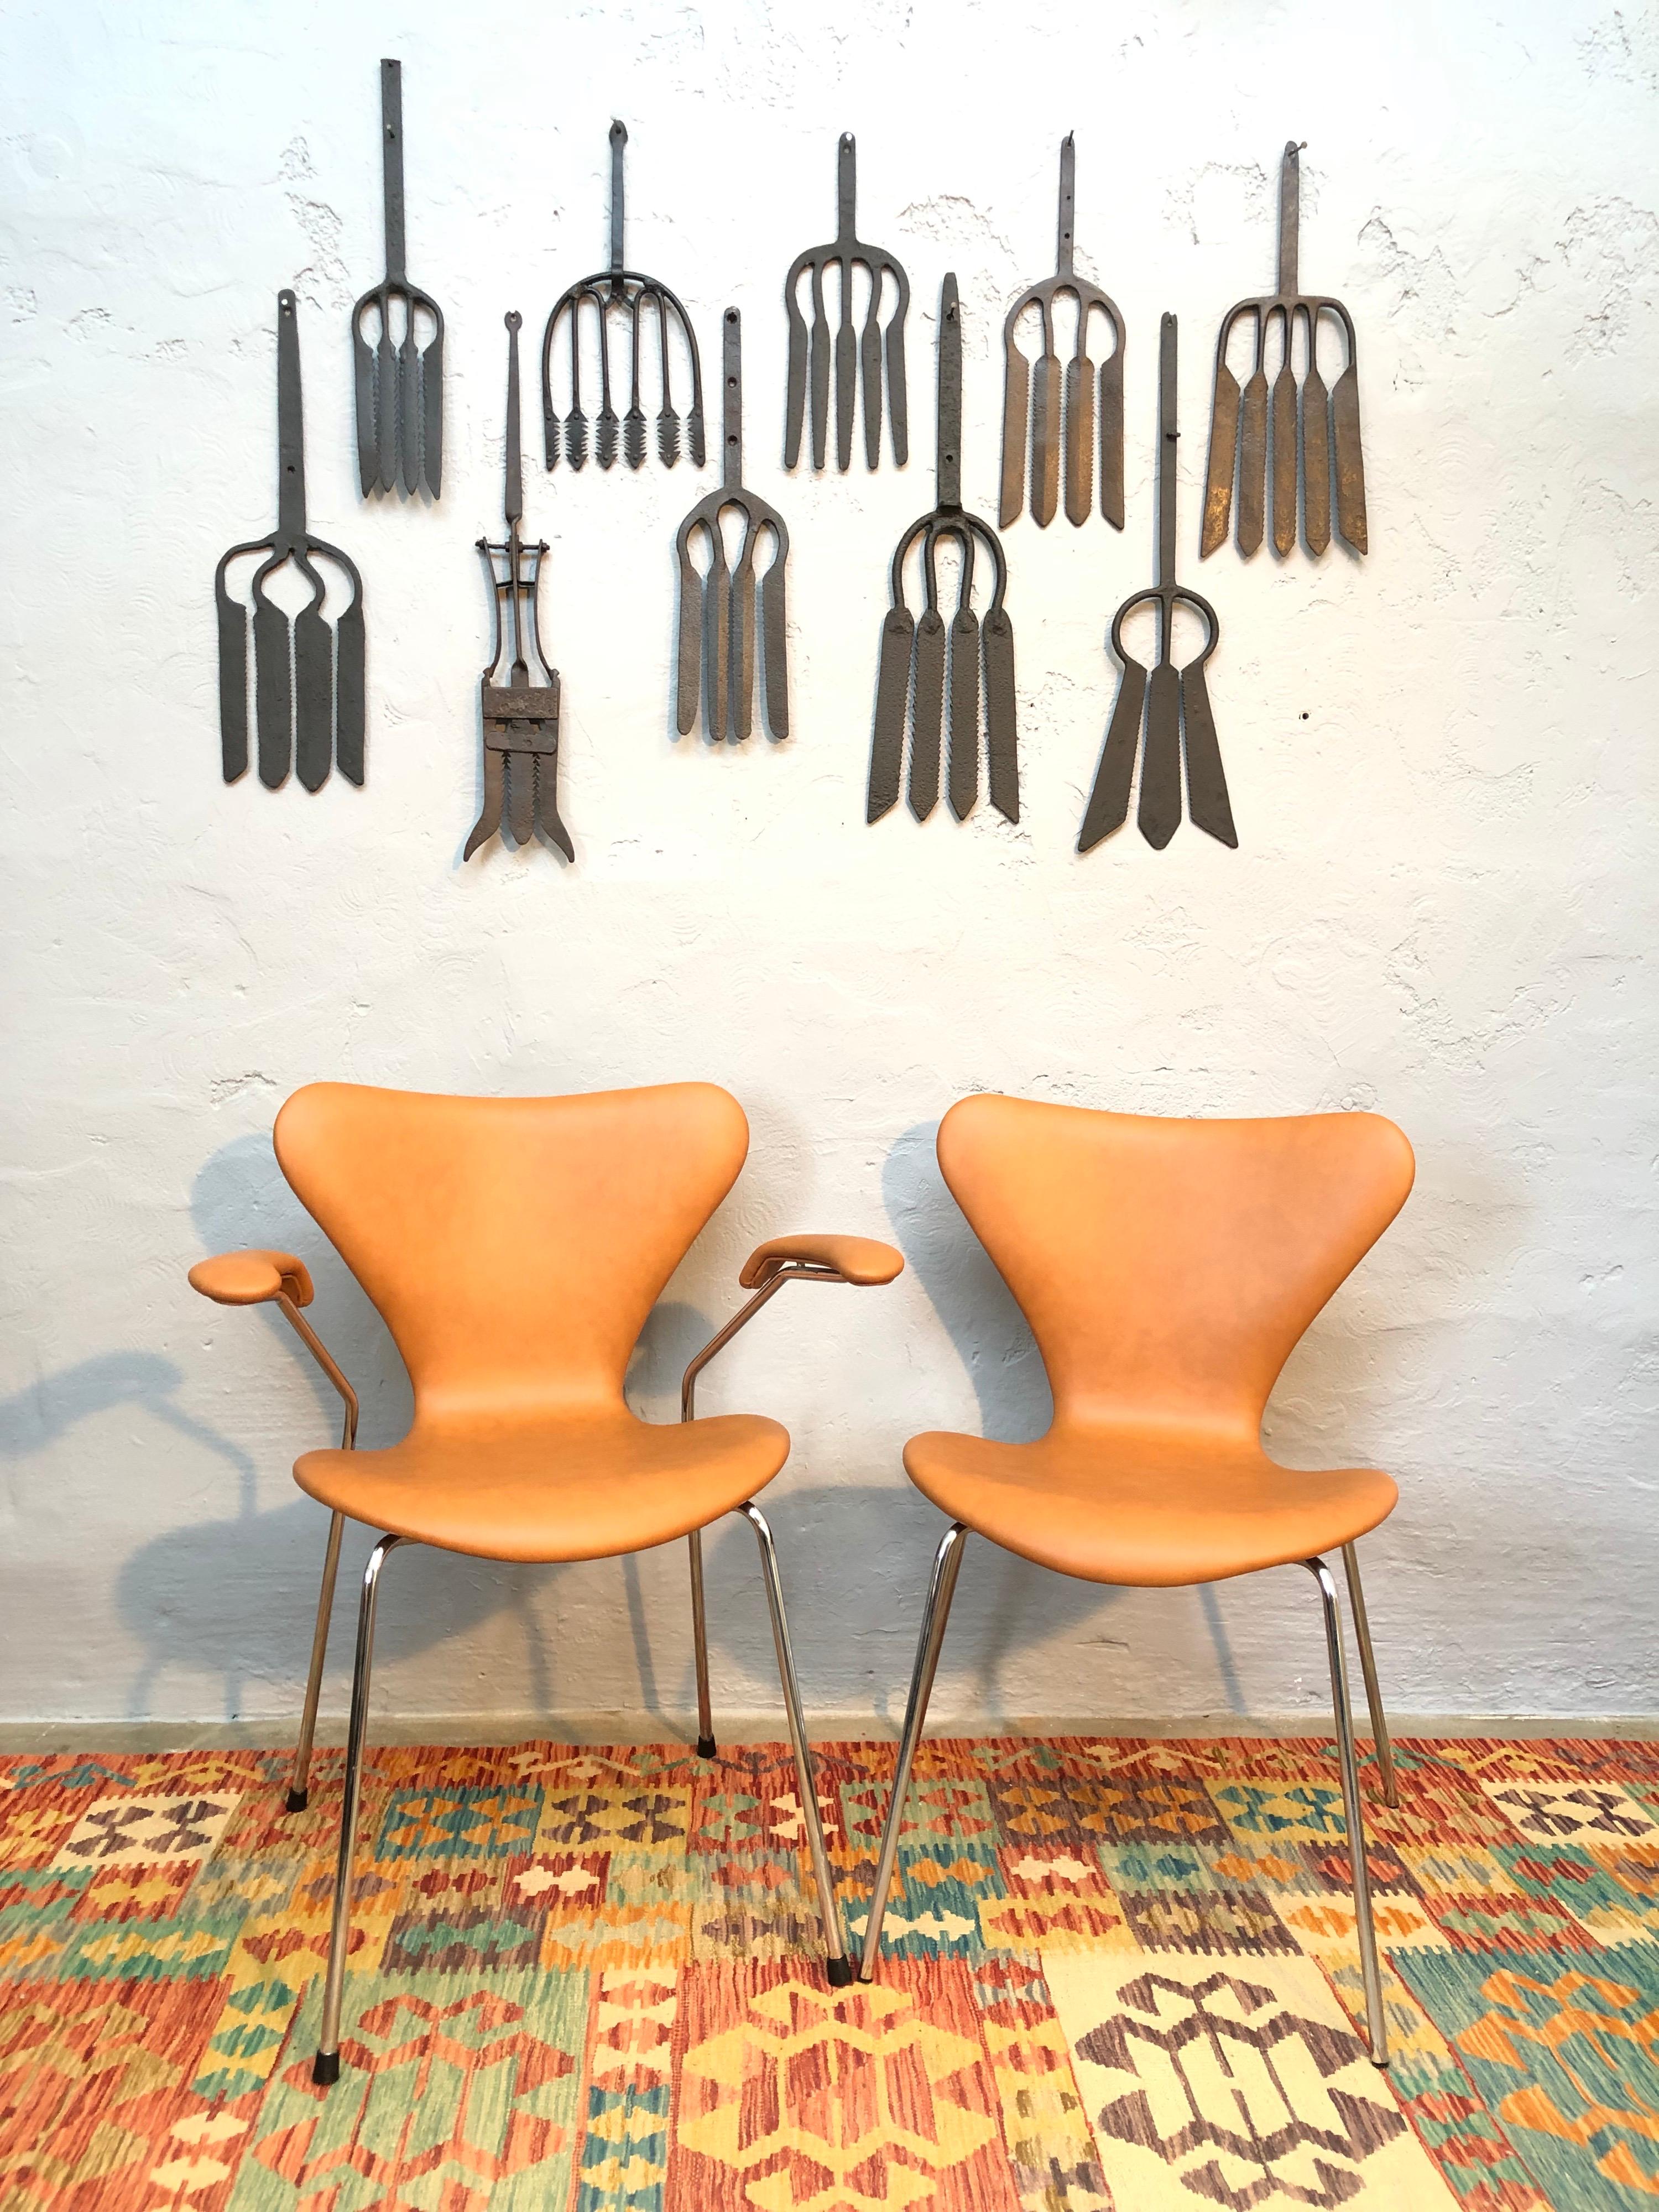 Hand-Crafted 6 Vintage Iconic Chairs by Arne Jacobsen for Fritz Hansen in Leather